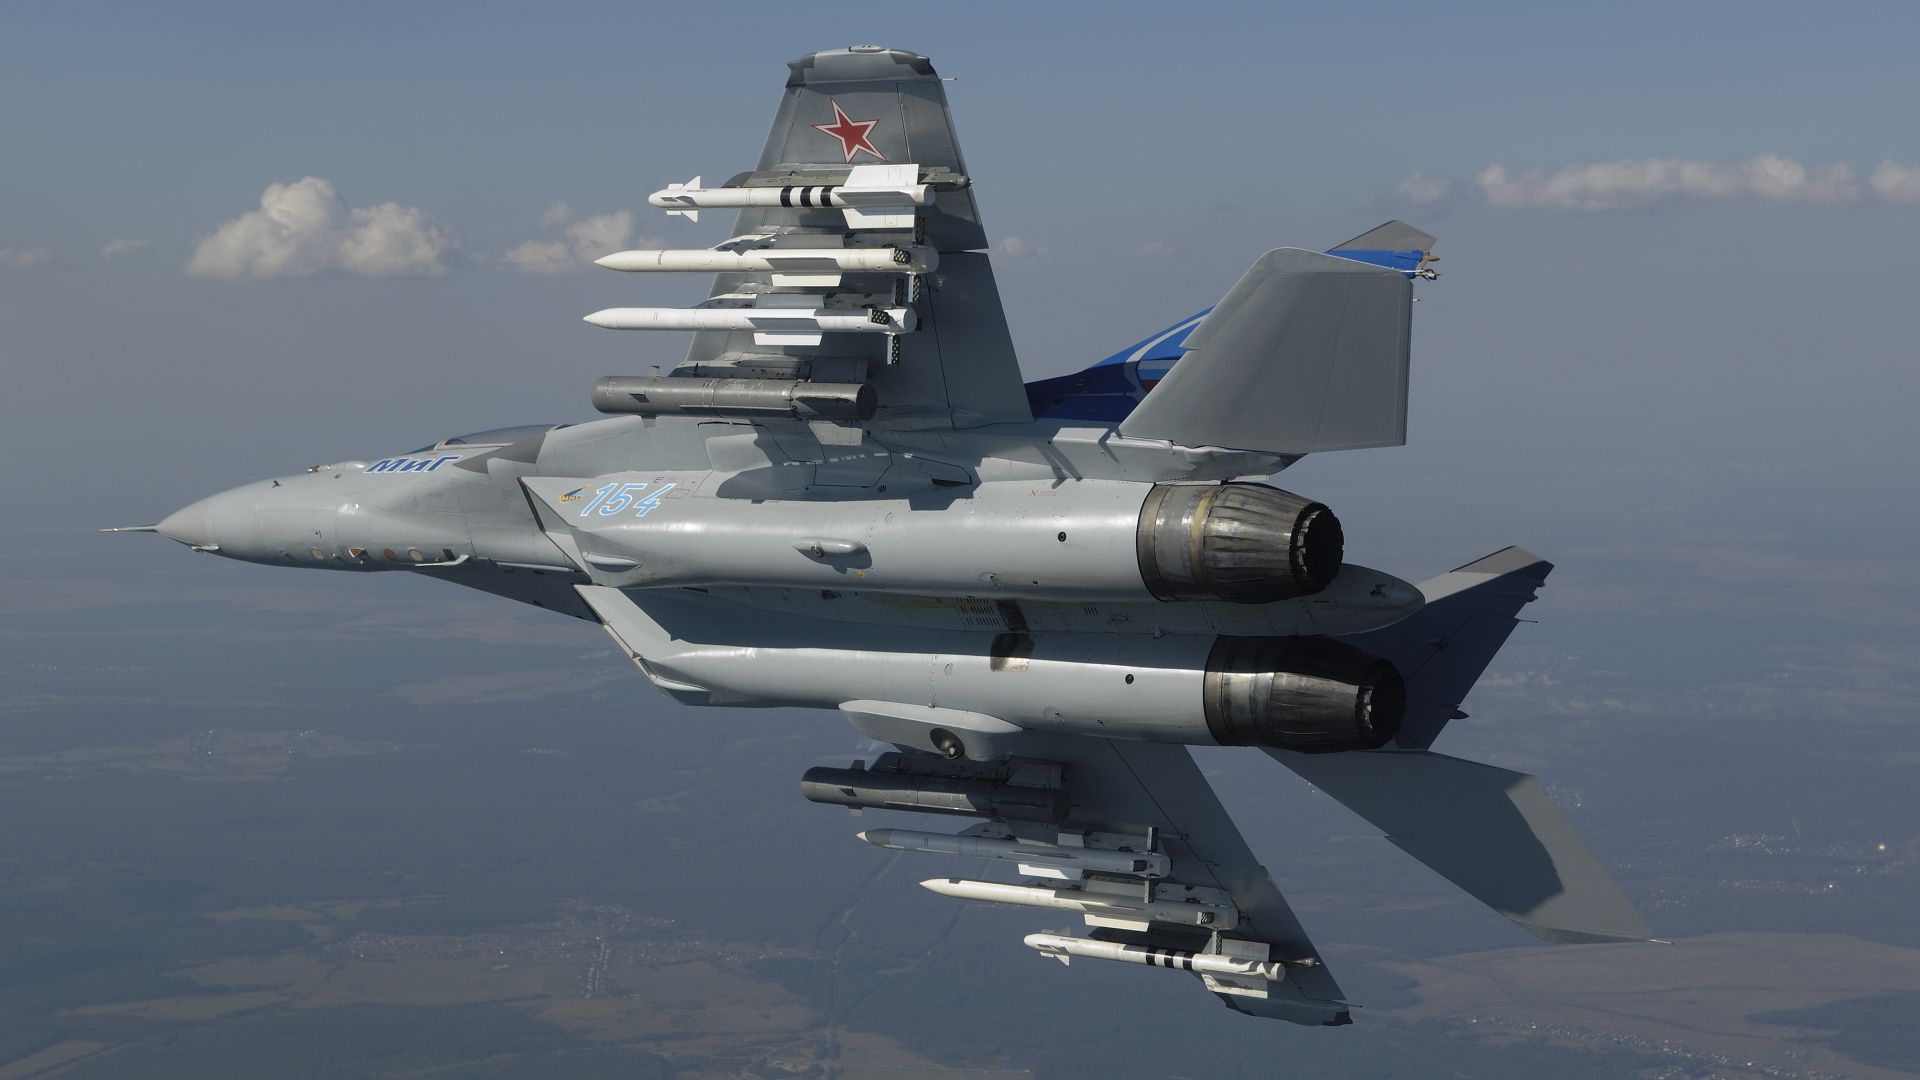 Wallpaper MIG-35, fighter, Russian Army, Military #79191920 x 1080